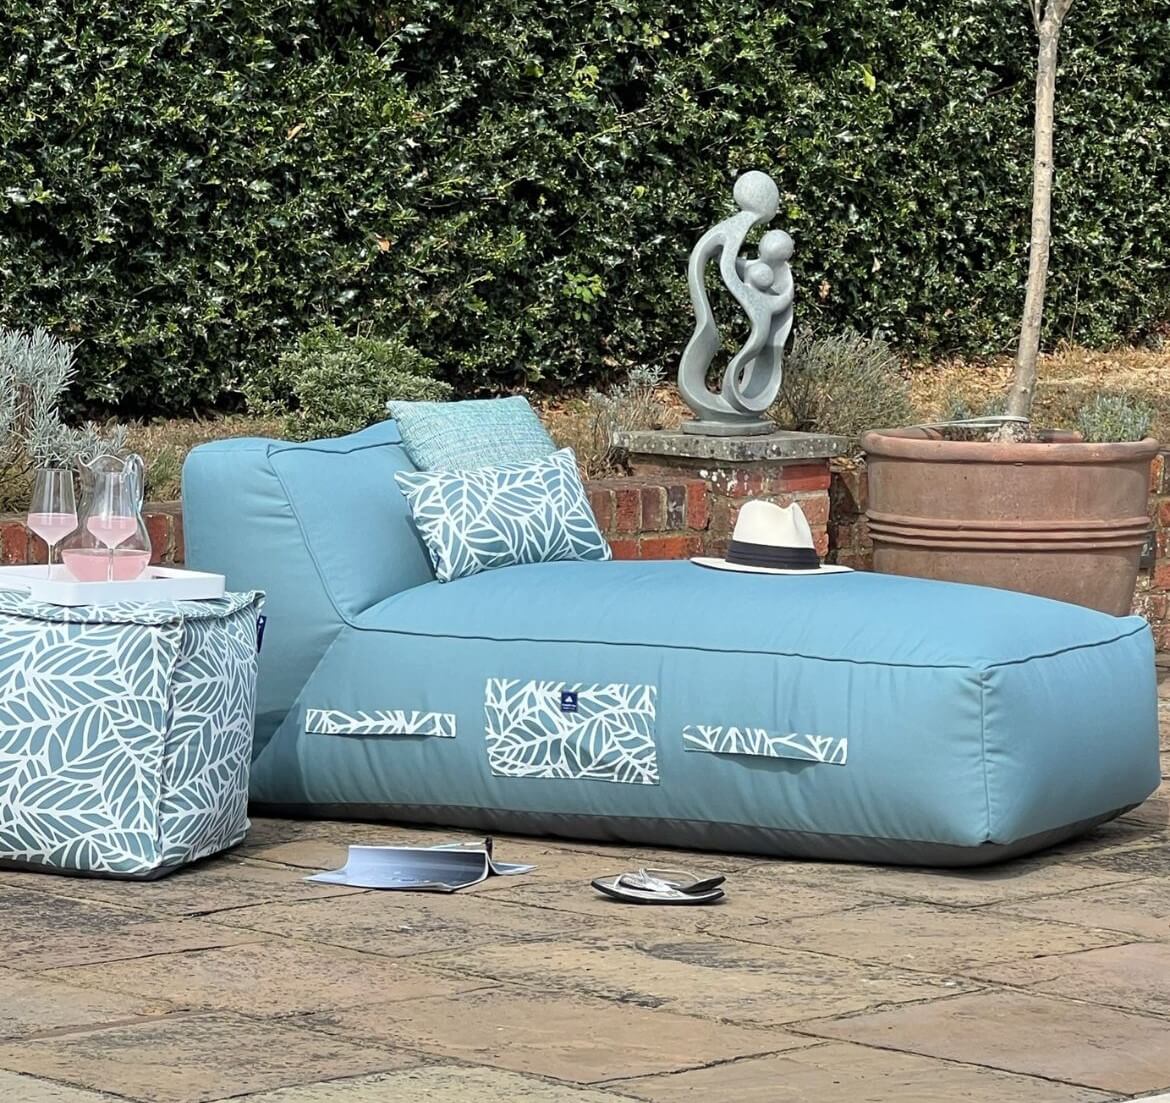 Ocean blue fabric cushioned sun lounger with palm-patterned outdoor cushions. There is a jug of cool pink lemonade and two glasses on a palm-patterned pouffe.